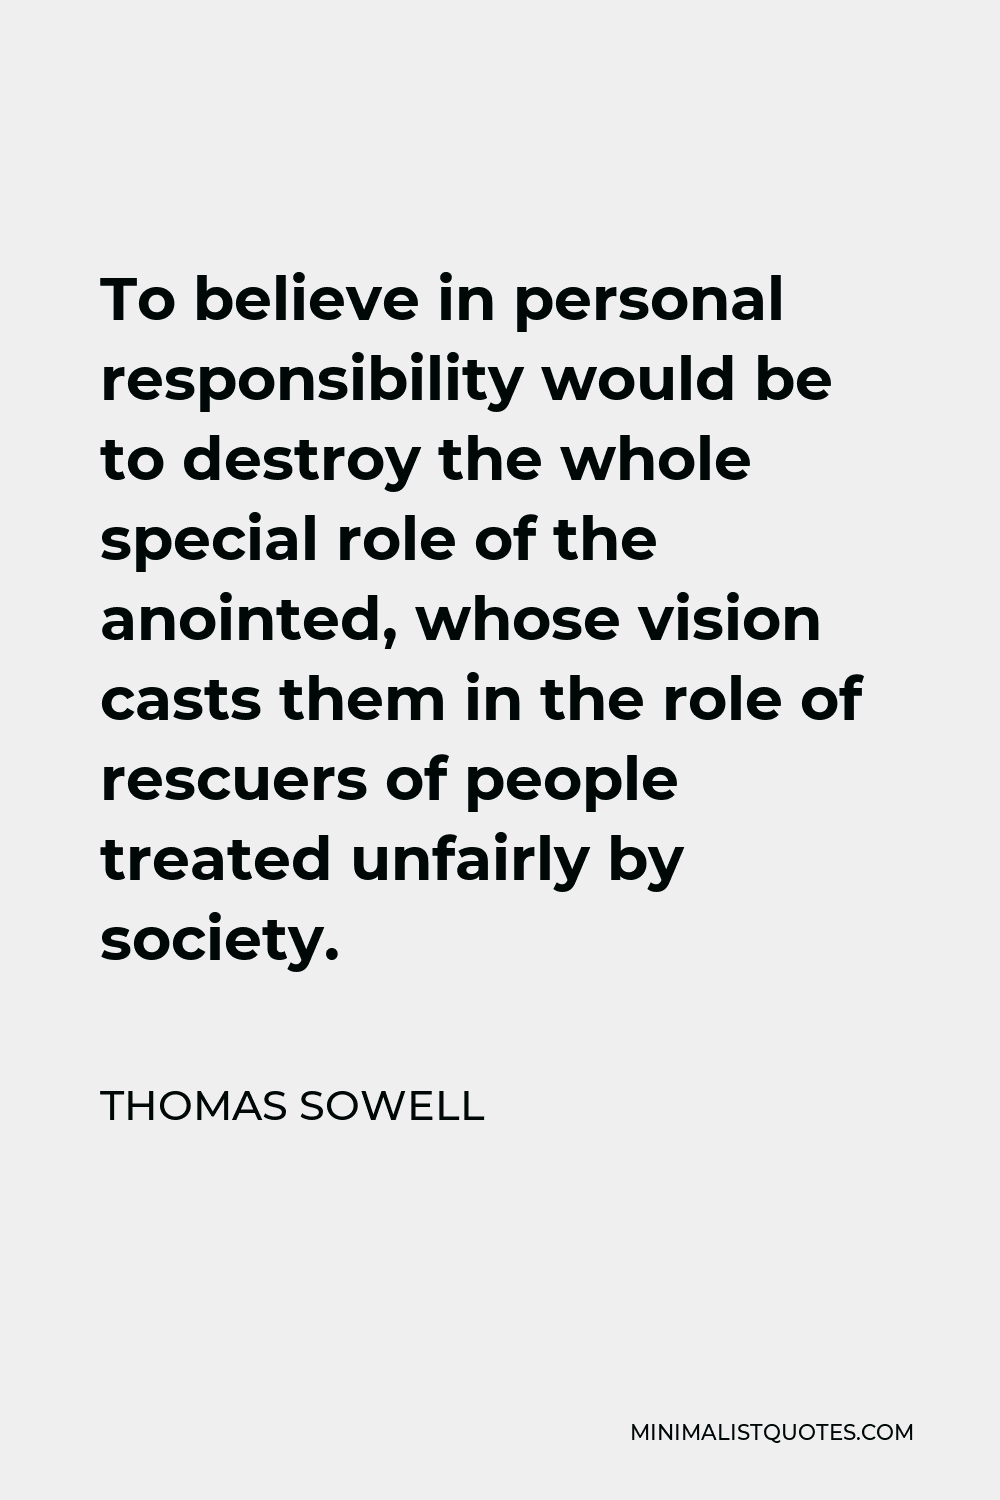 Thomas Sowell Quote - To believe in personal responsibility would be to destroy the whole special role of the anointed, whose vision casts them in the role of rescuers of people treated unfairly by society.